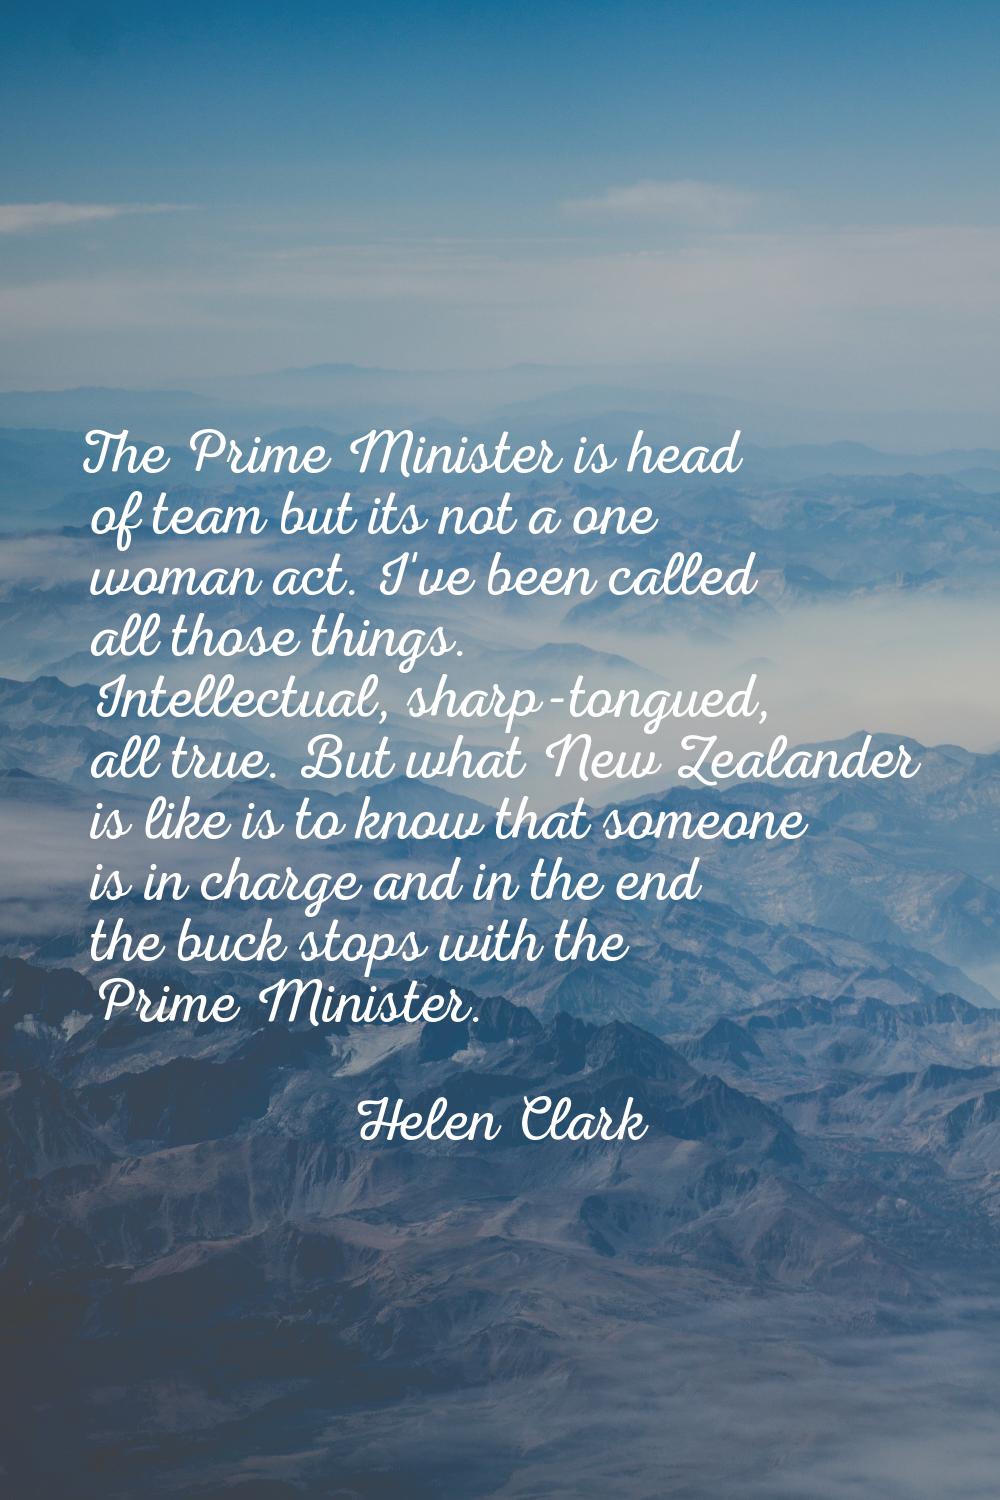 The Prime Minister is head of team but its not a one woman act. I've been called all those things. 